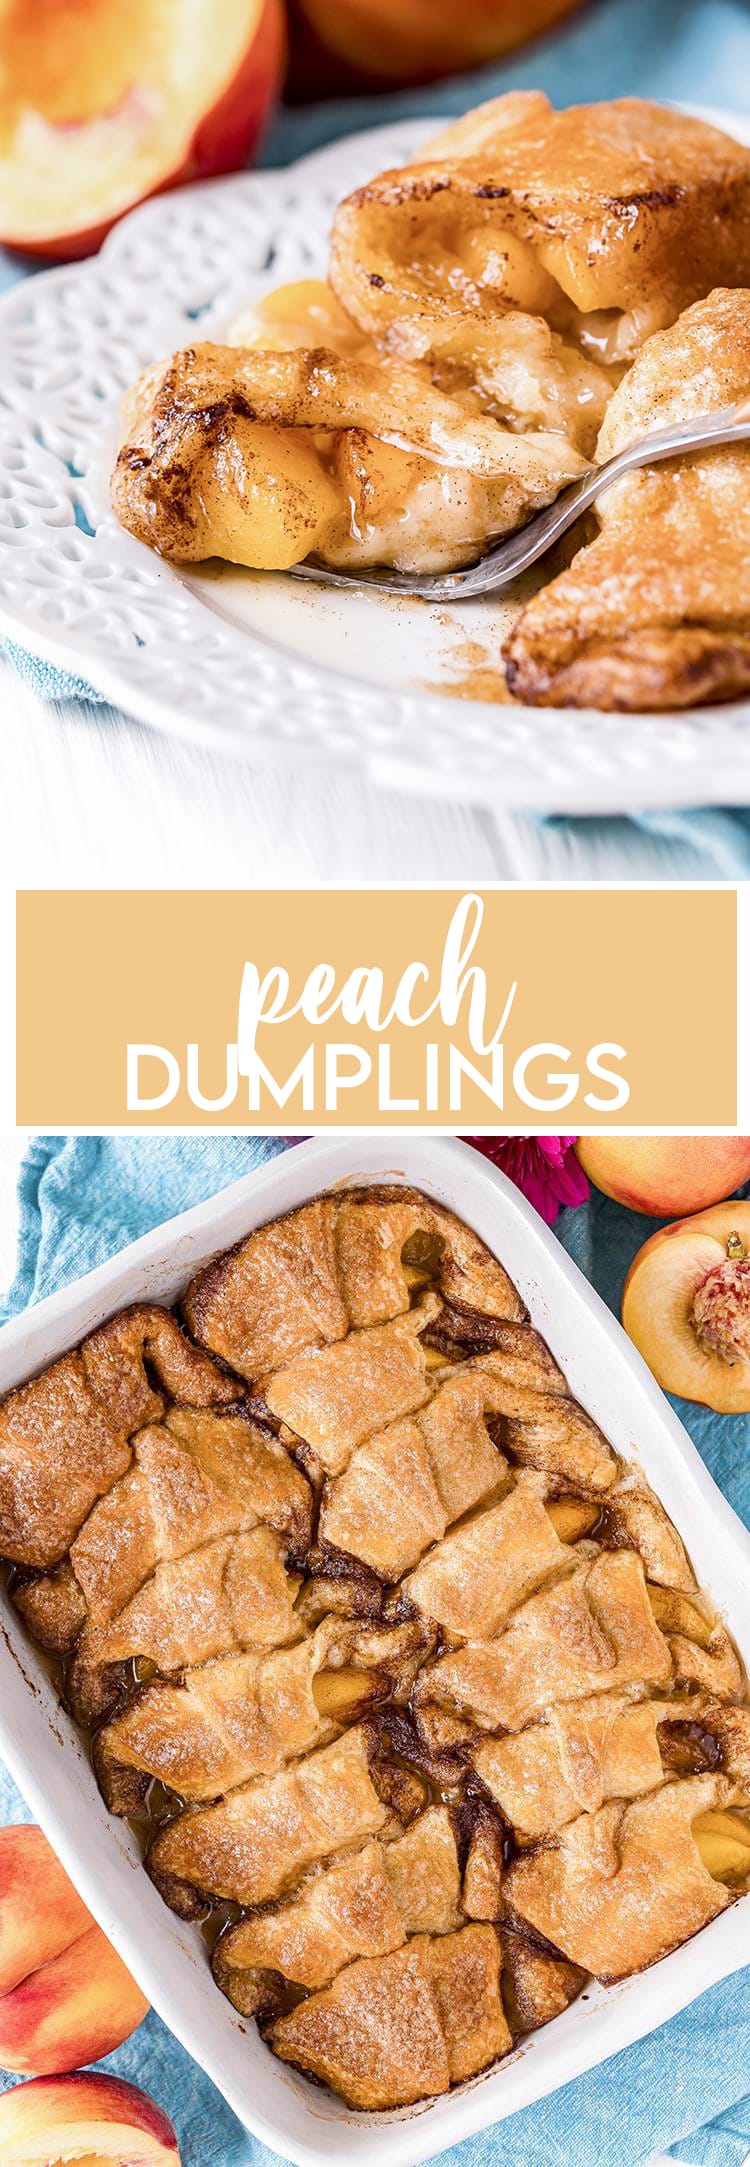 Peach dumplings on a plate with with text overlay for pinterest then another photo of peach dumplings in a pan